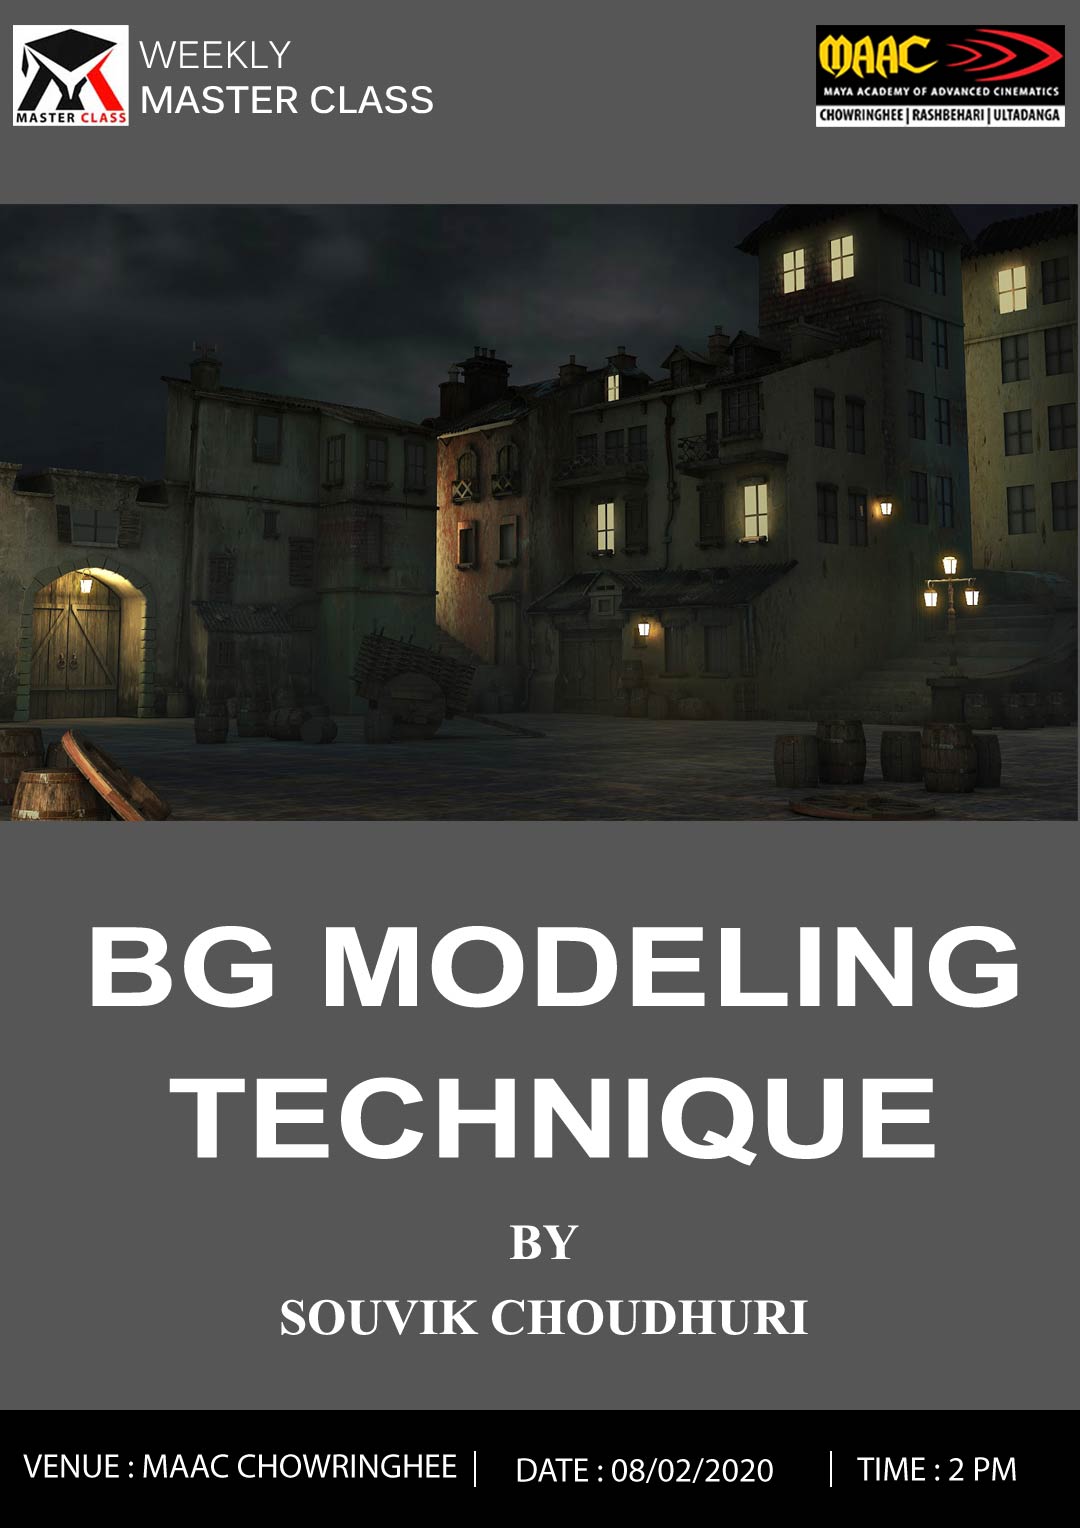 Weekly Master Class on BG Modeling Technique